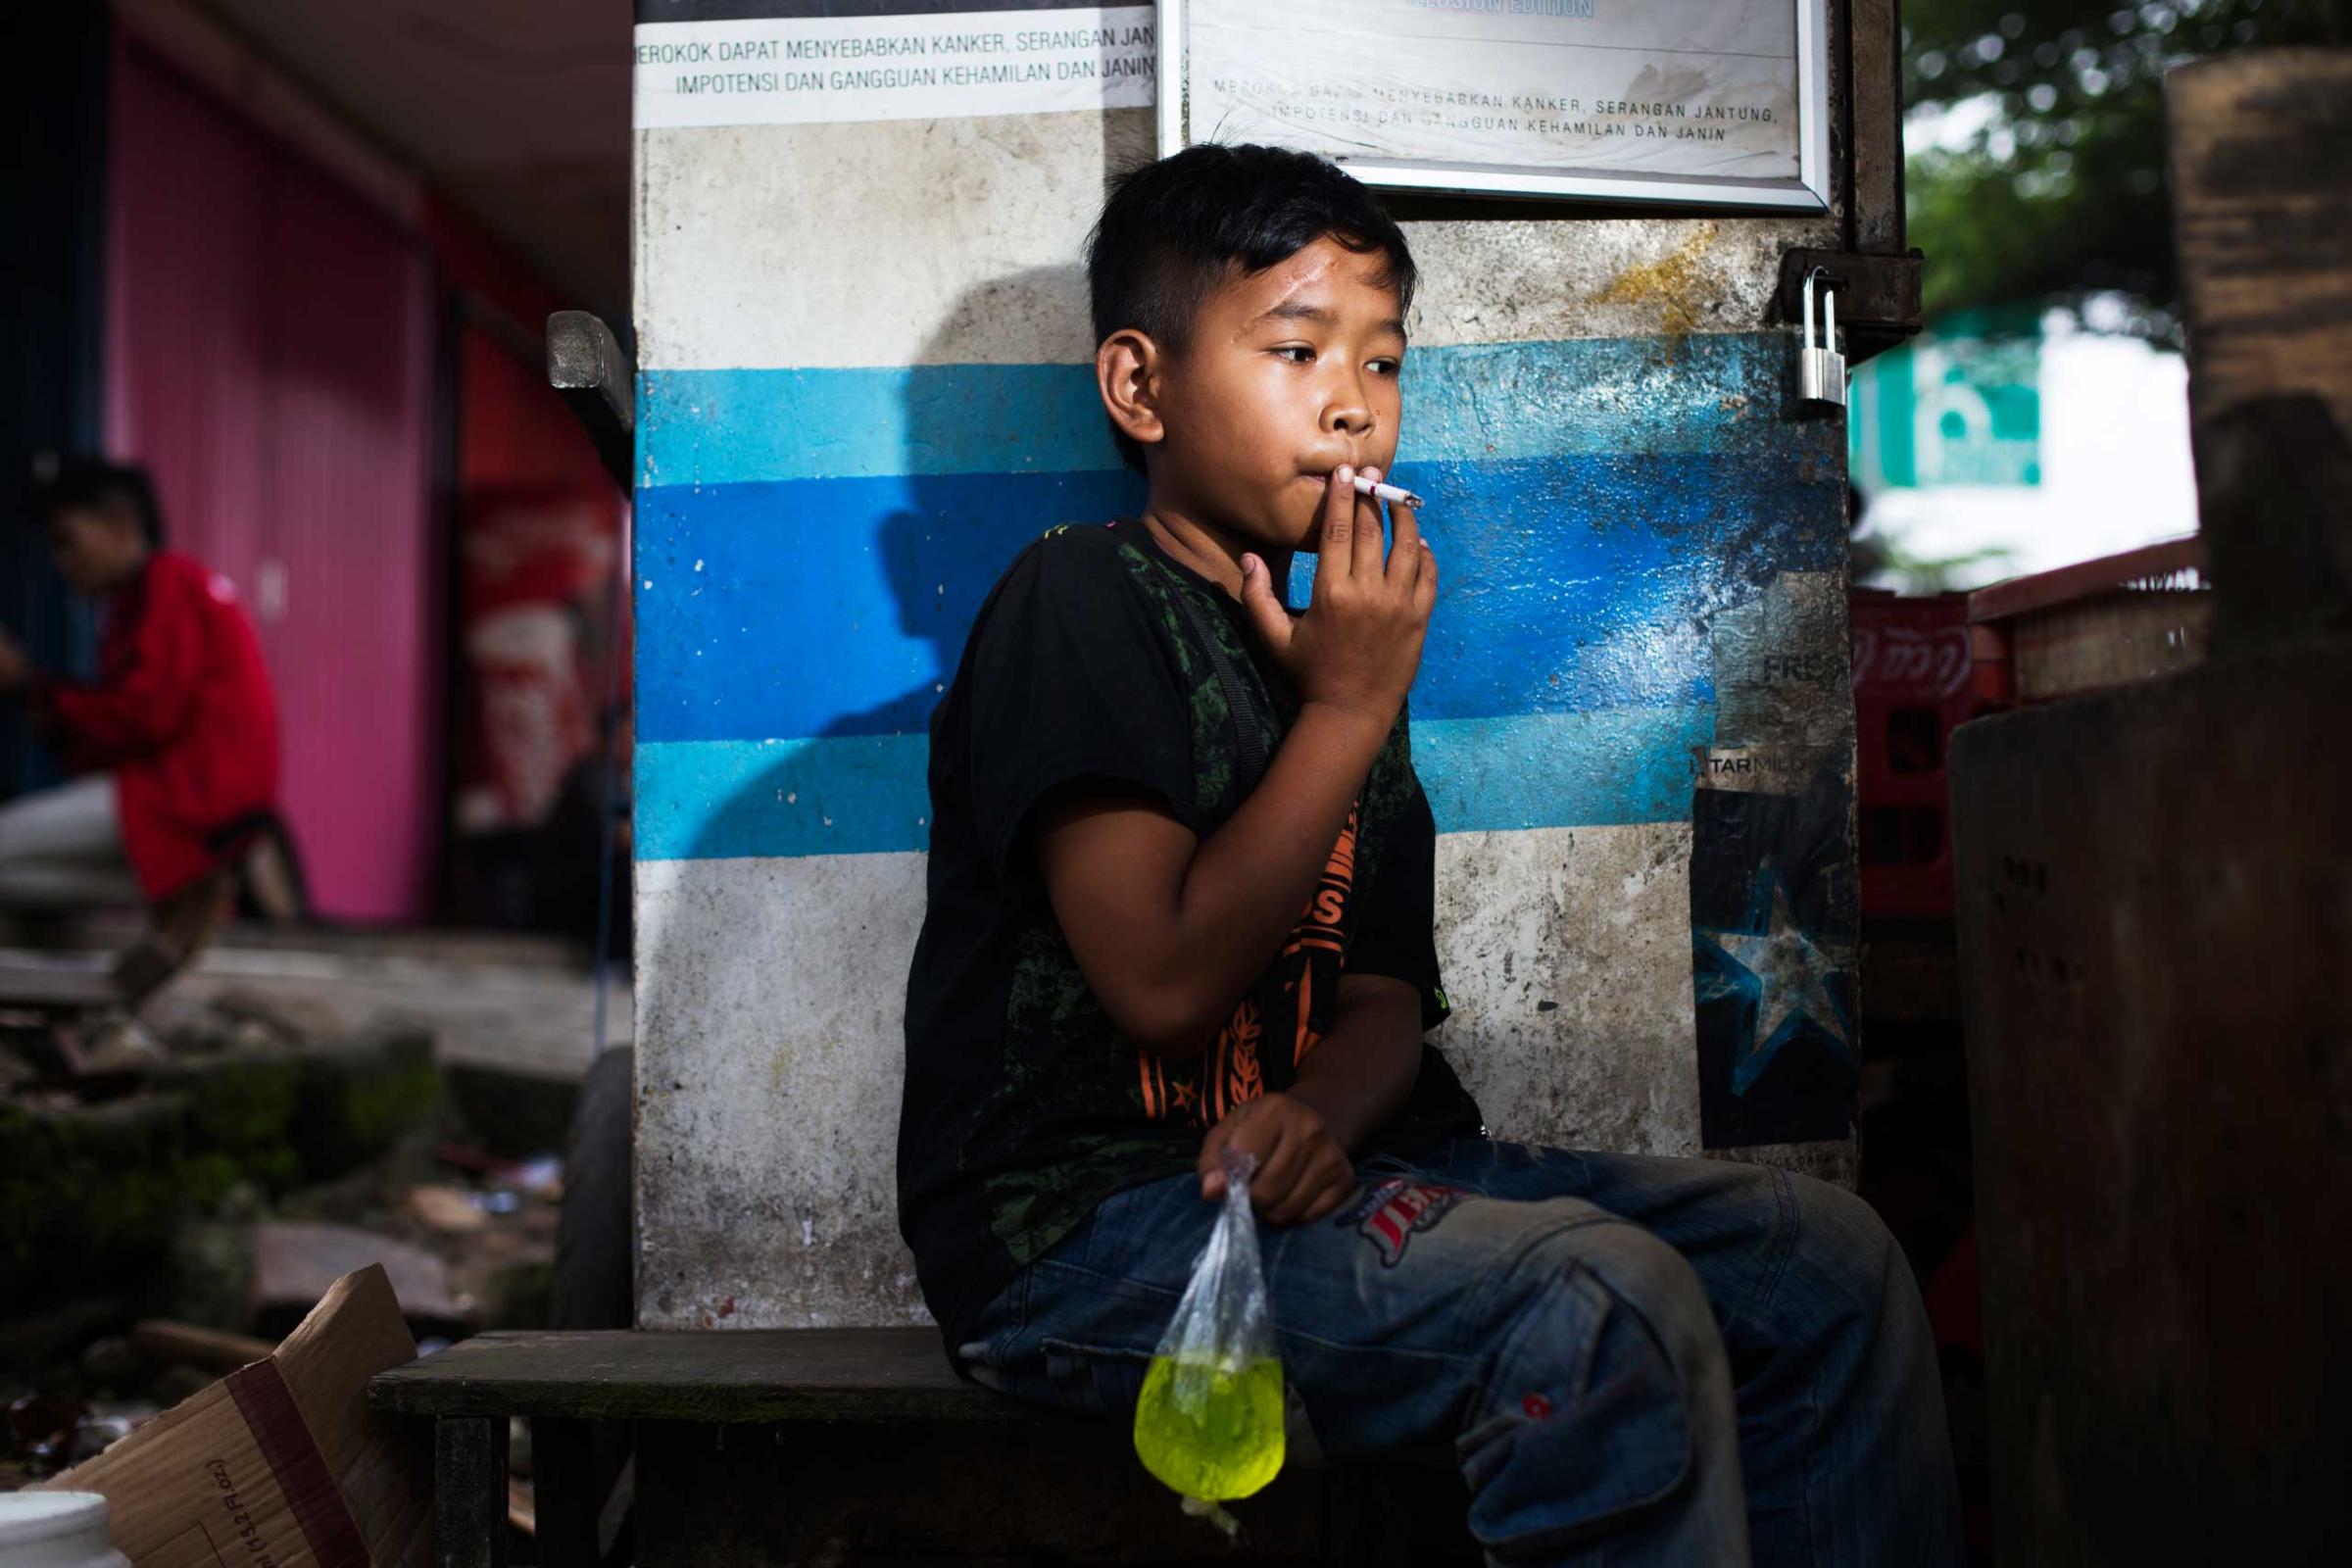 Eman poses for a photo as he smokes a cigarette while clutching a bag of juice in east Jakarta, Indonesia on February 12, 2014.